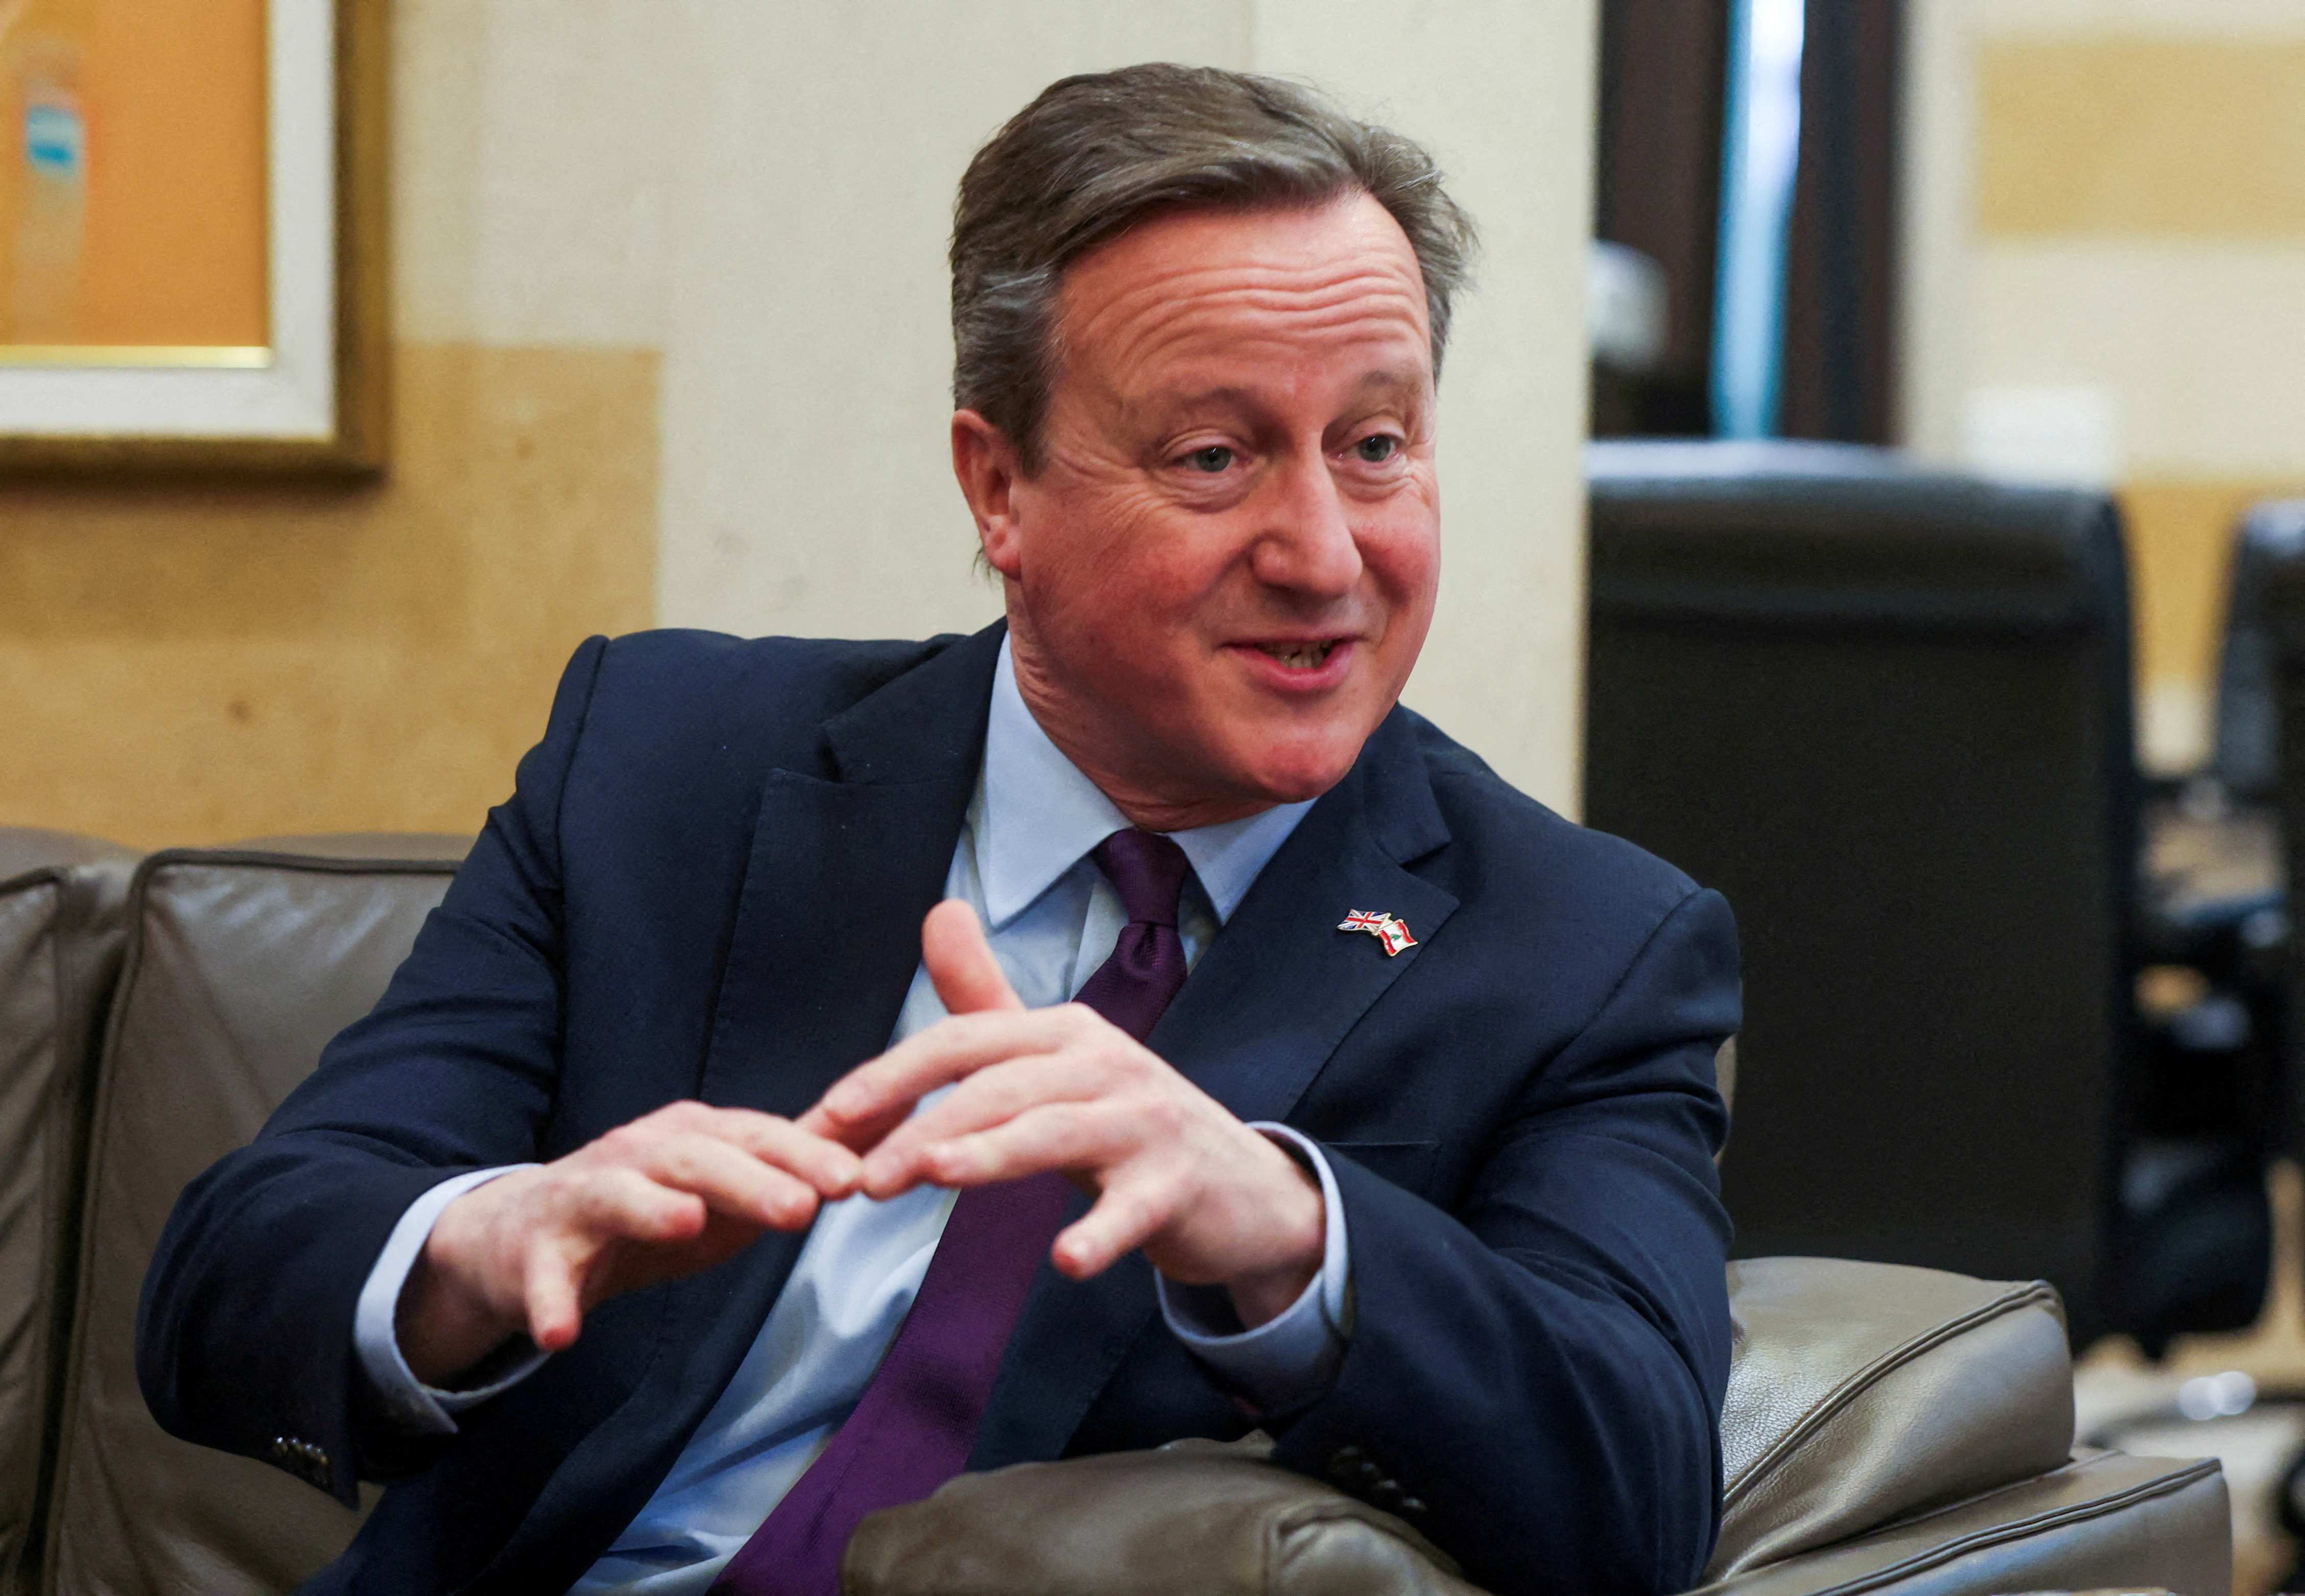 British Foreign Secretary Cameron meets with Lebanon's caretaker Prime Minister in Beirut